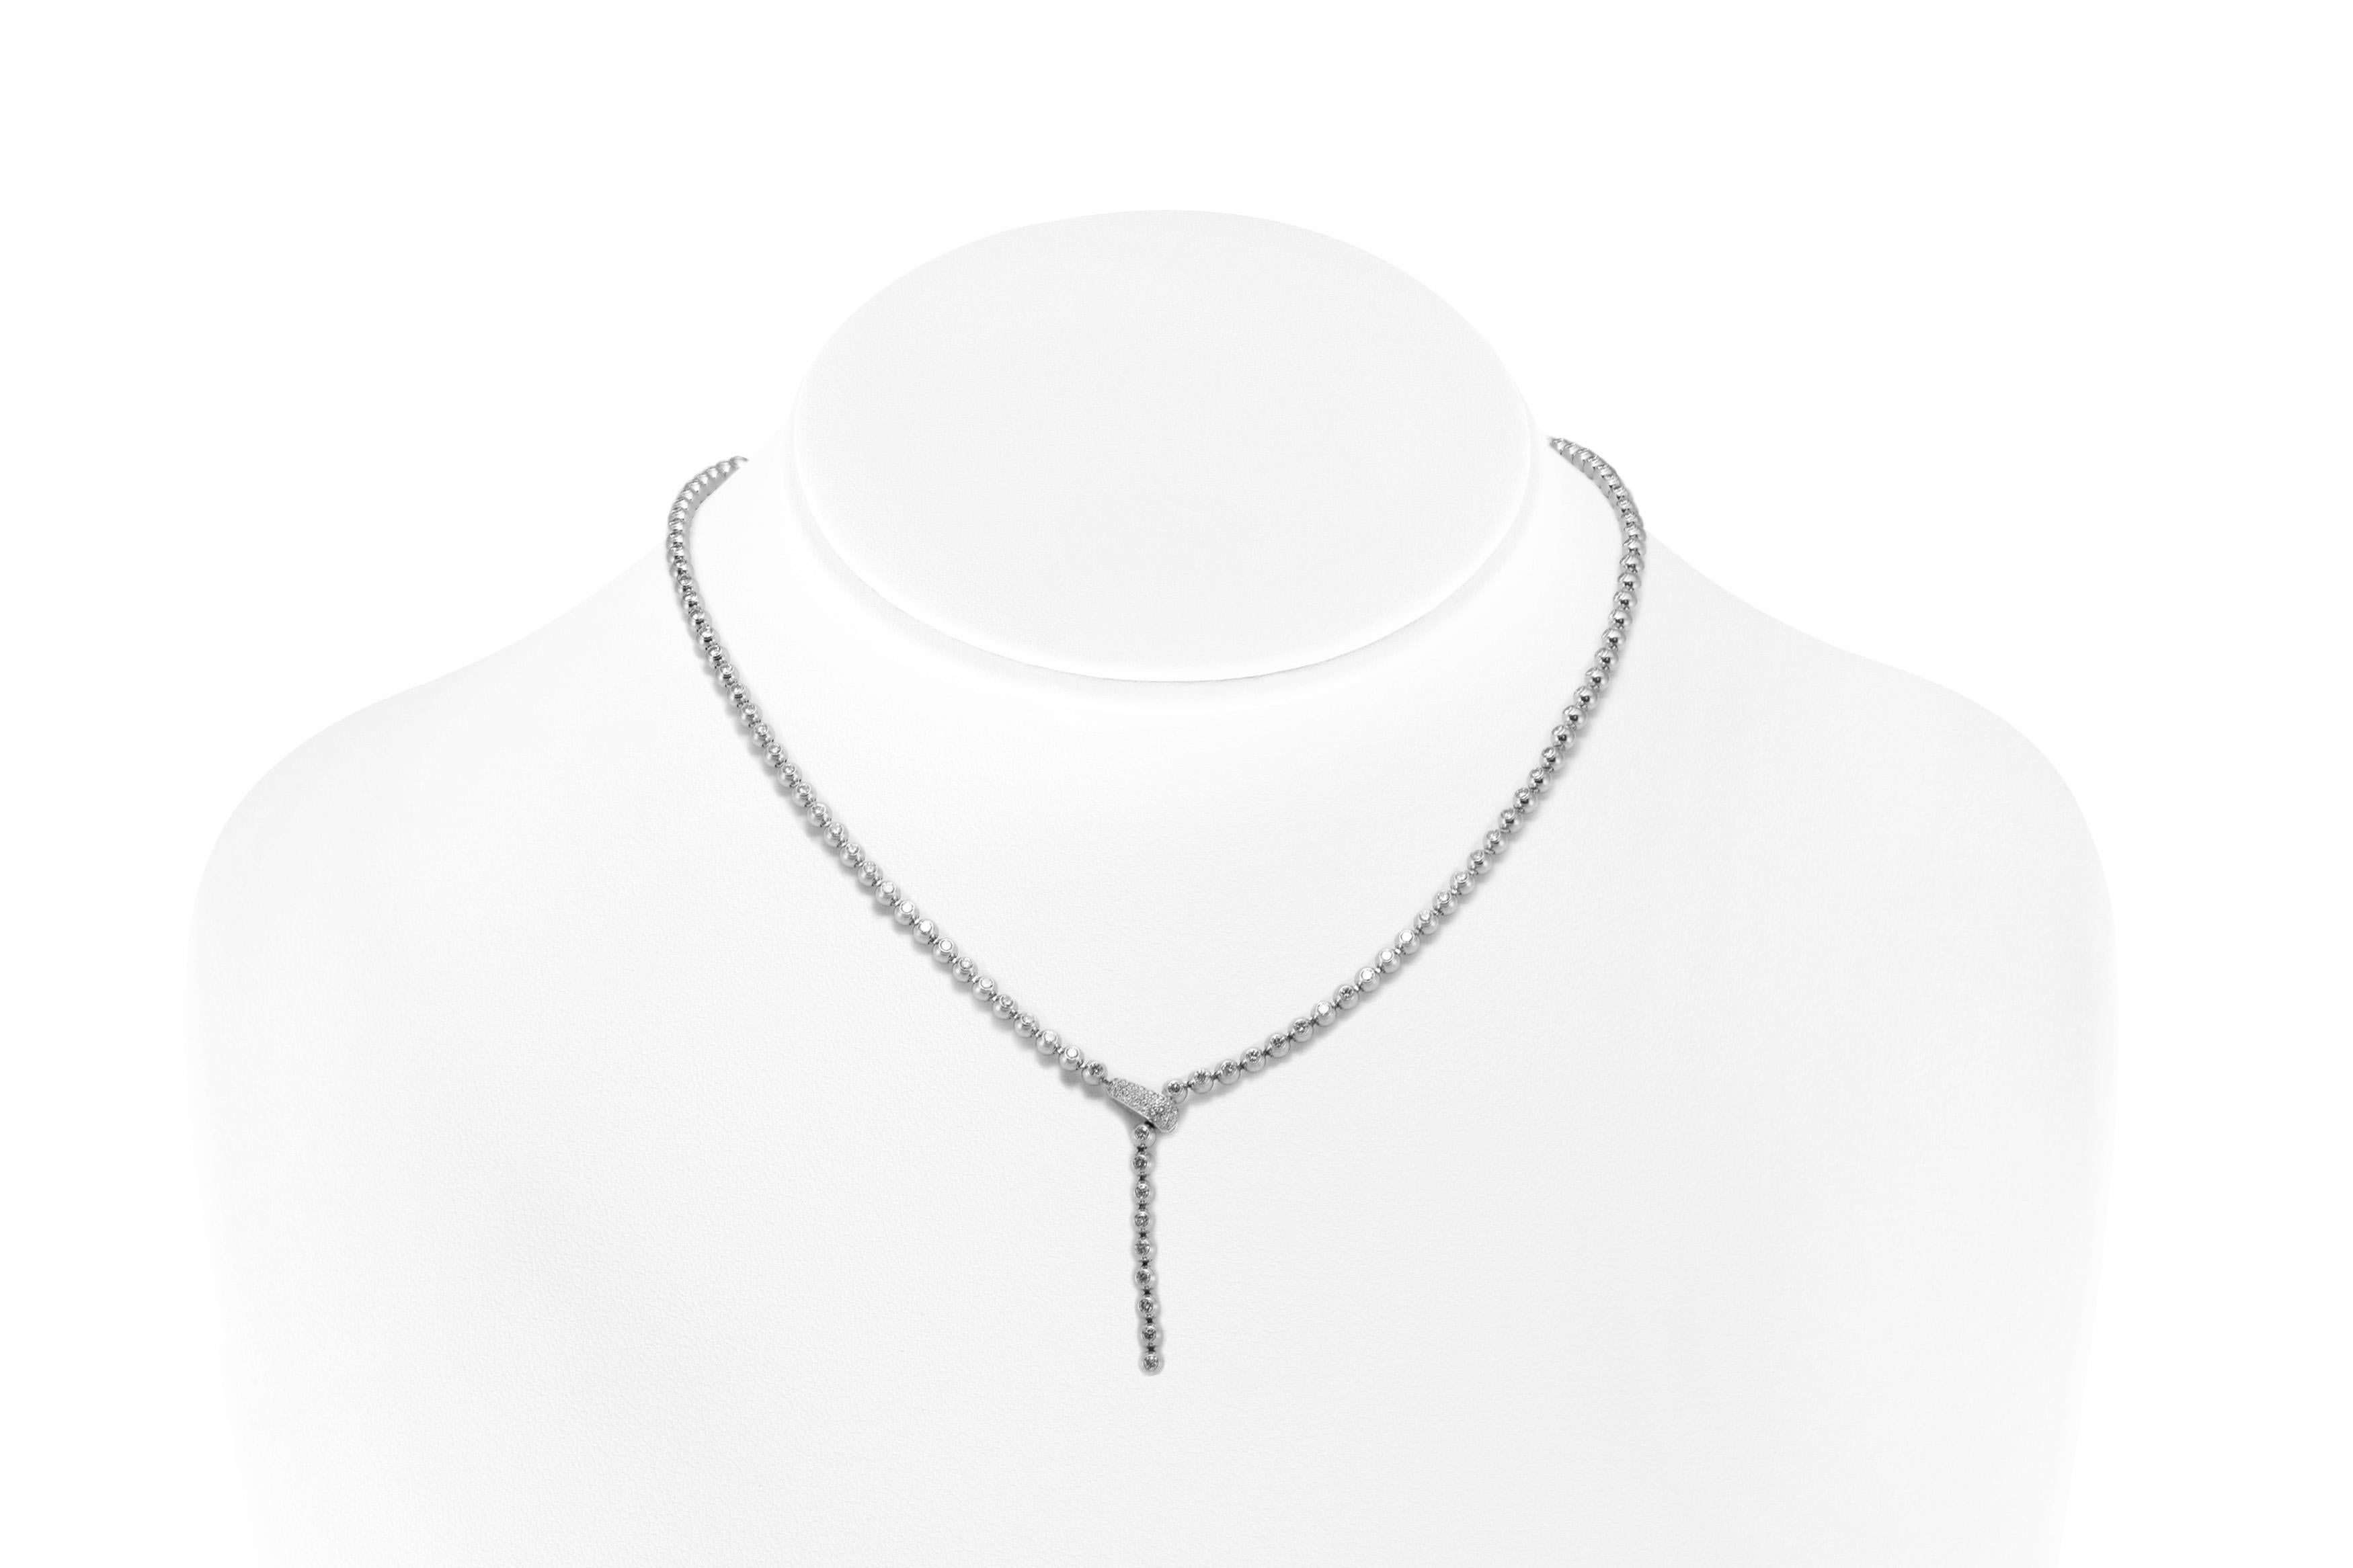 Cartier necklace is finely crafted in 18K white gold with diamonds weighing approximately 6.80 carat.
Necklace comes with box.